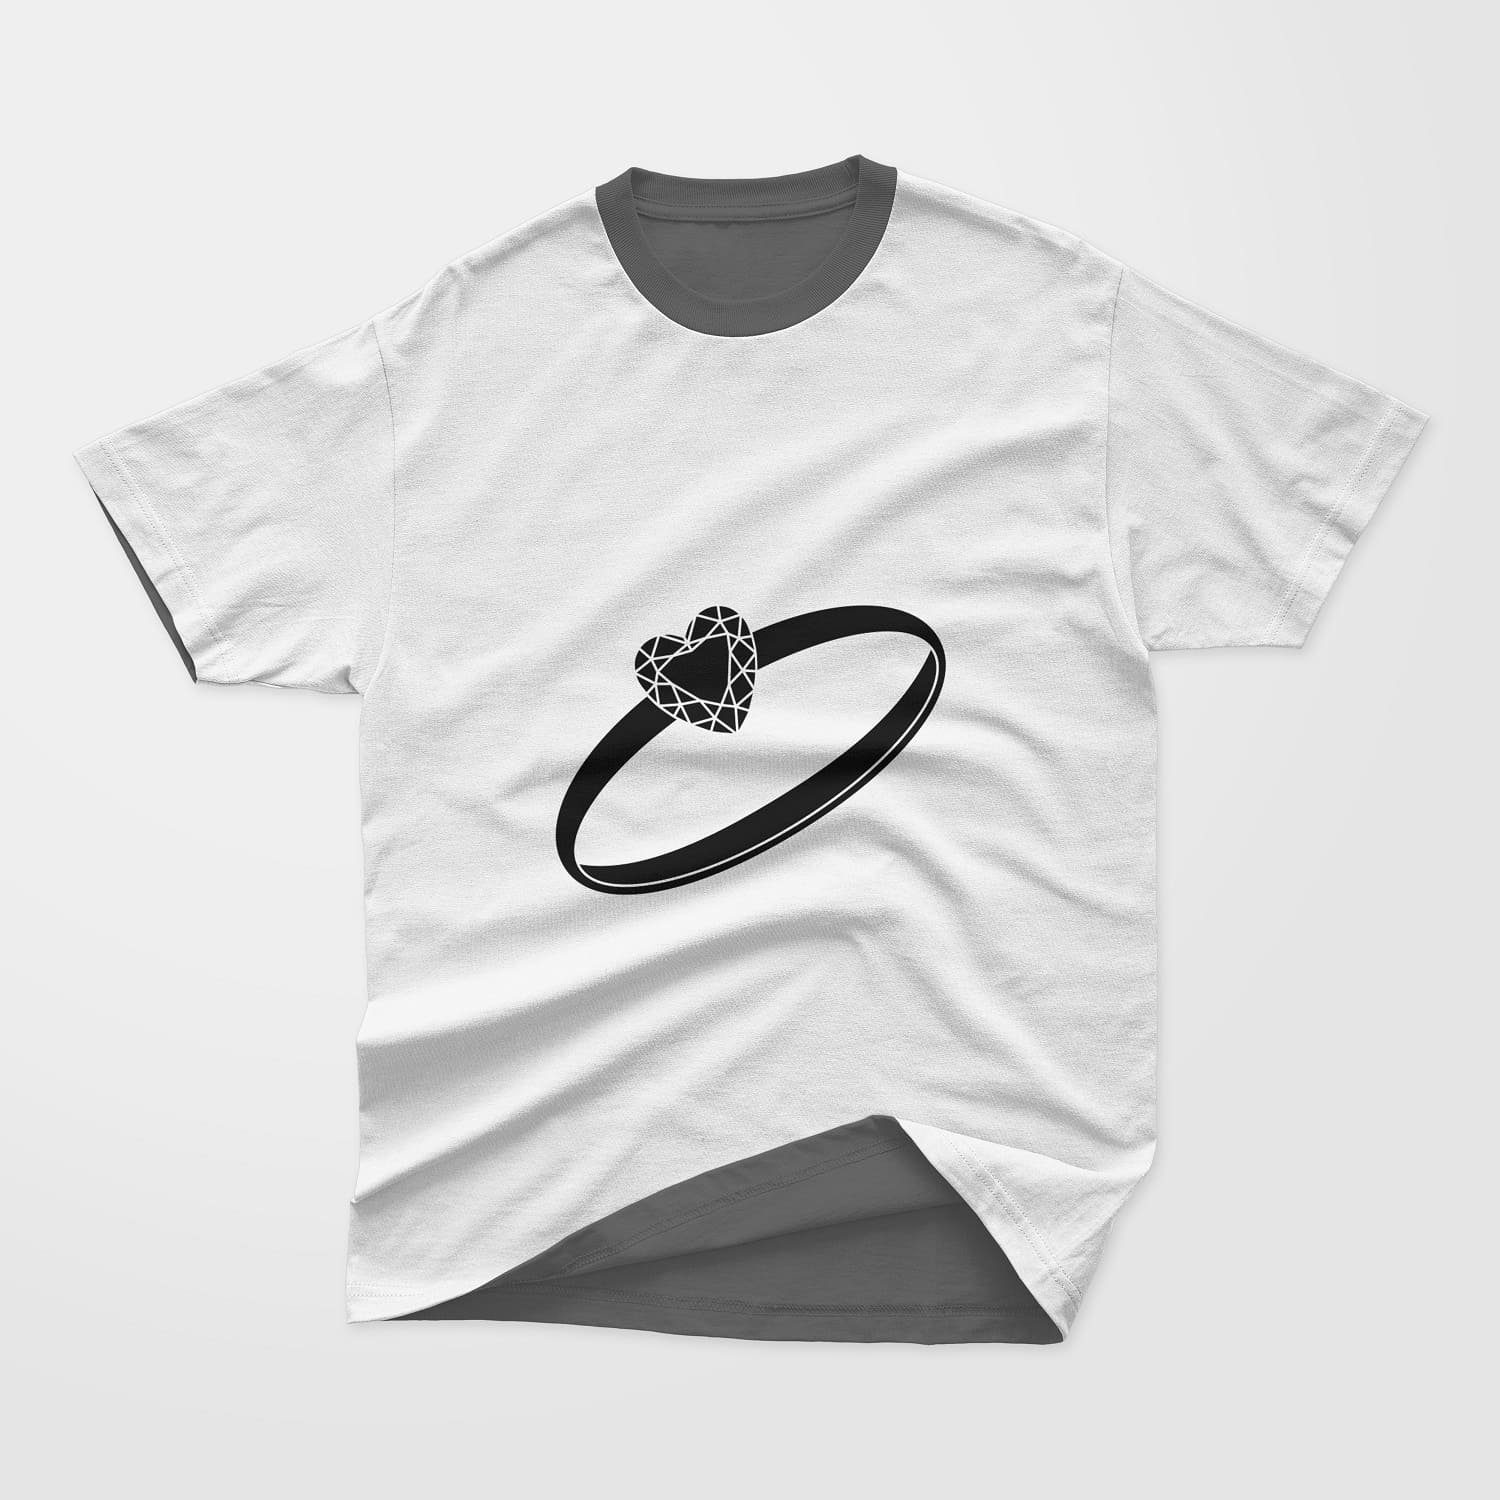 The t-shirt shows wedding rings with a heart-shaped gemstone.